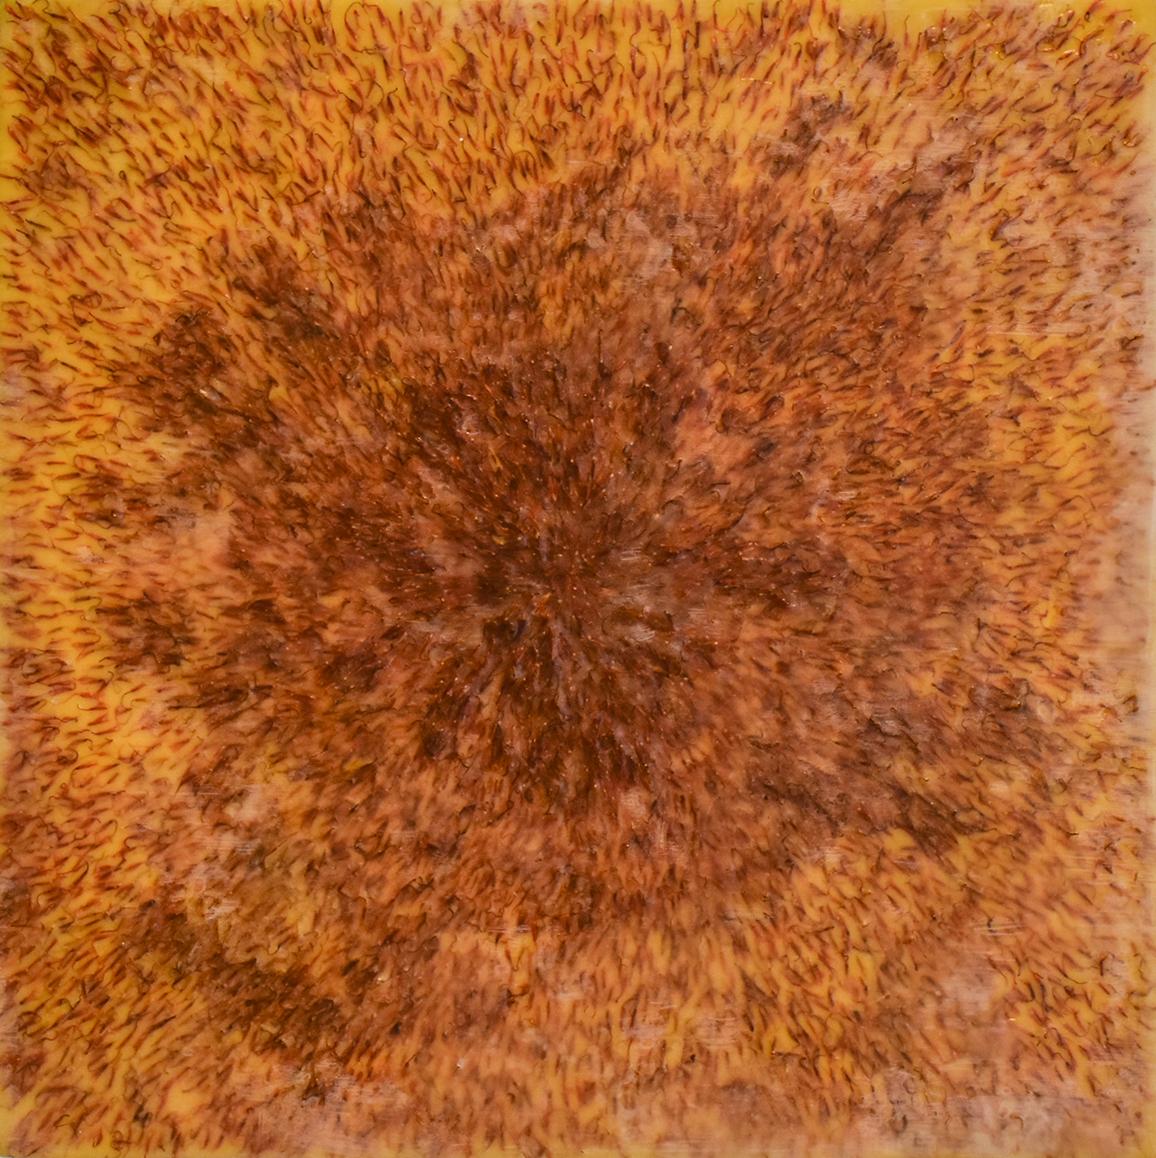 Safflower: Abstract Blood Orange Encaustic Painting on Panel with Saffron Fibers